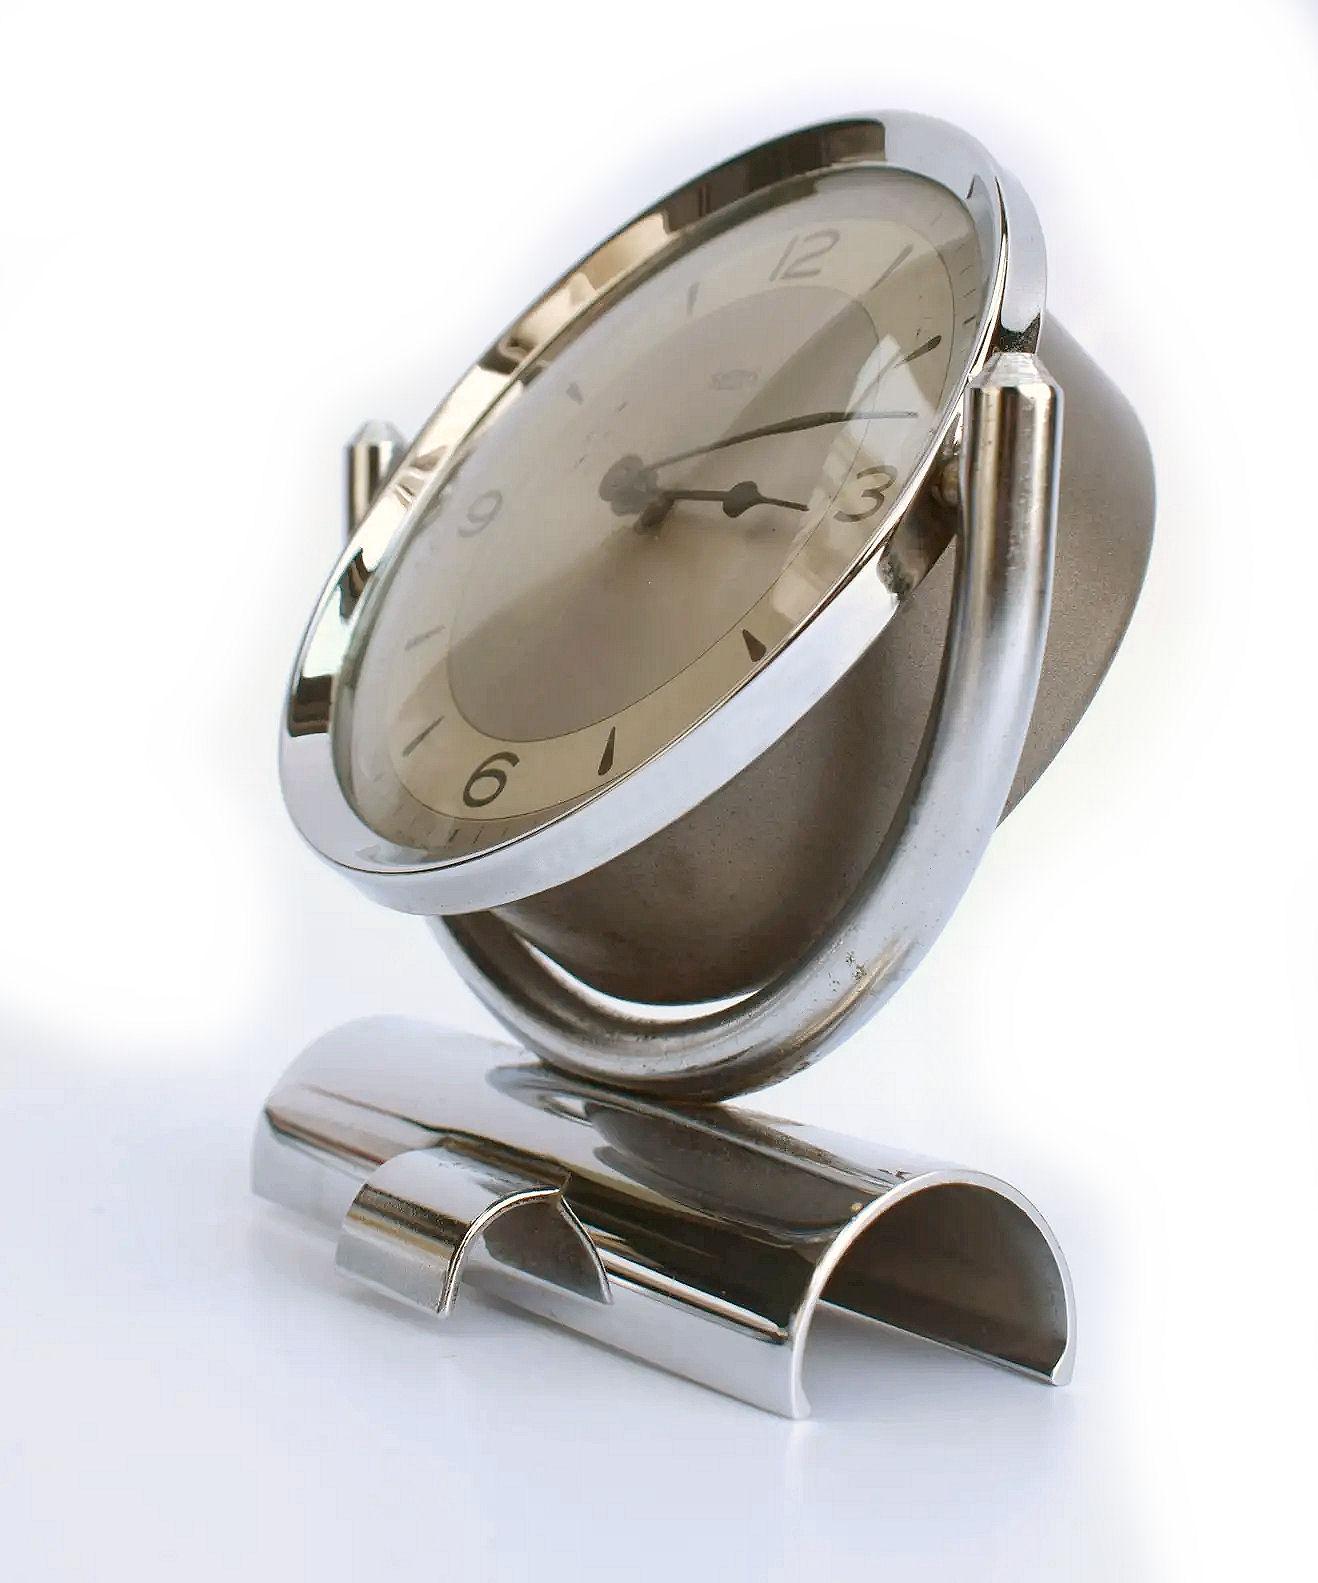 For your consideration is this very stylish English Art Deco chrome clock made by the British clockmakers 'smiths'. A 30 hour movement, fully serviced and keeping good time is housed in a fully chrome case. Condition of the casing is excellent with